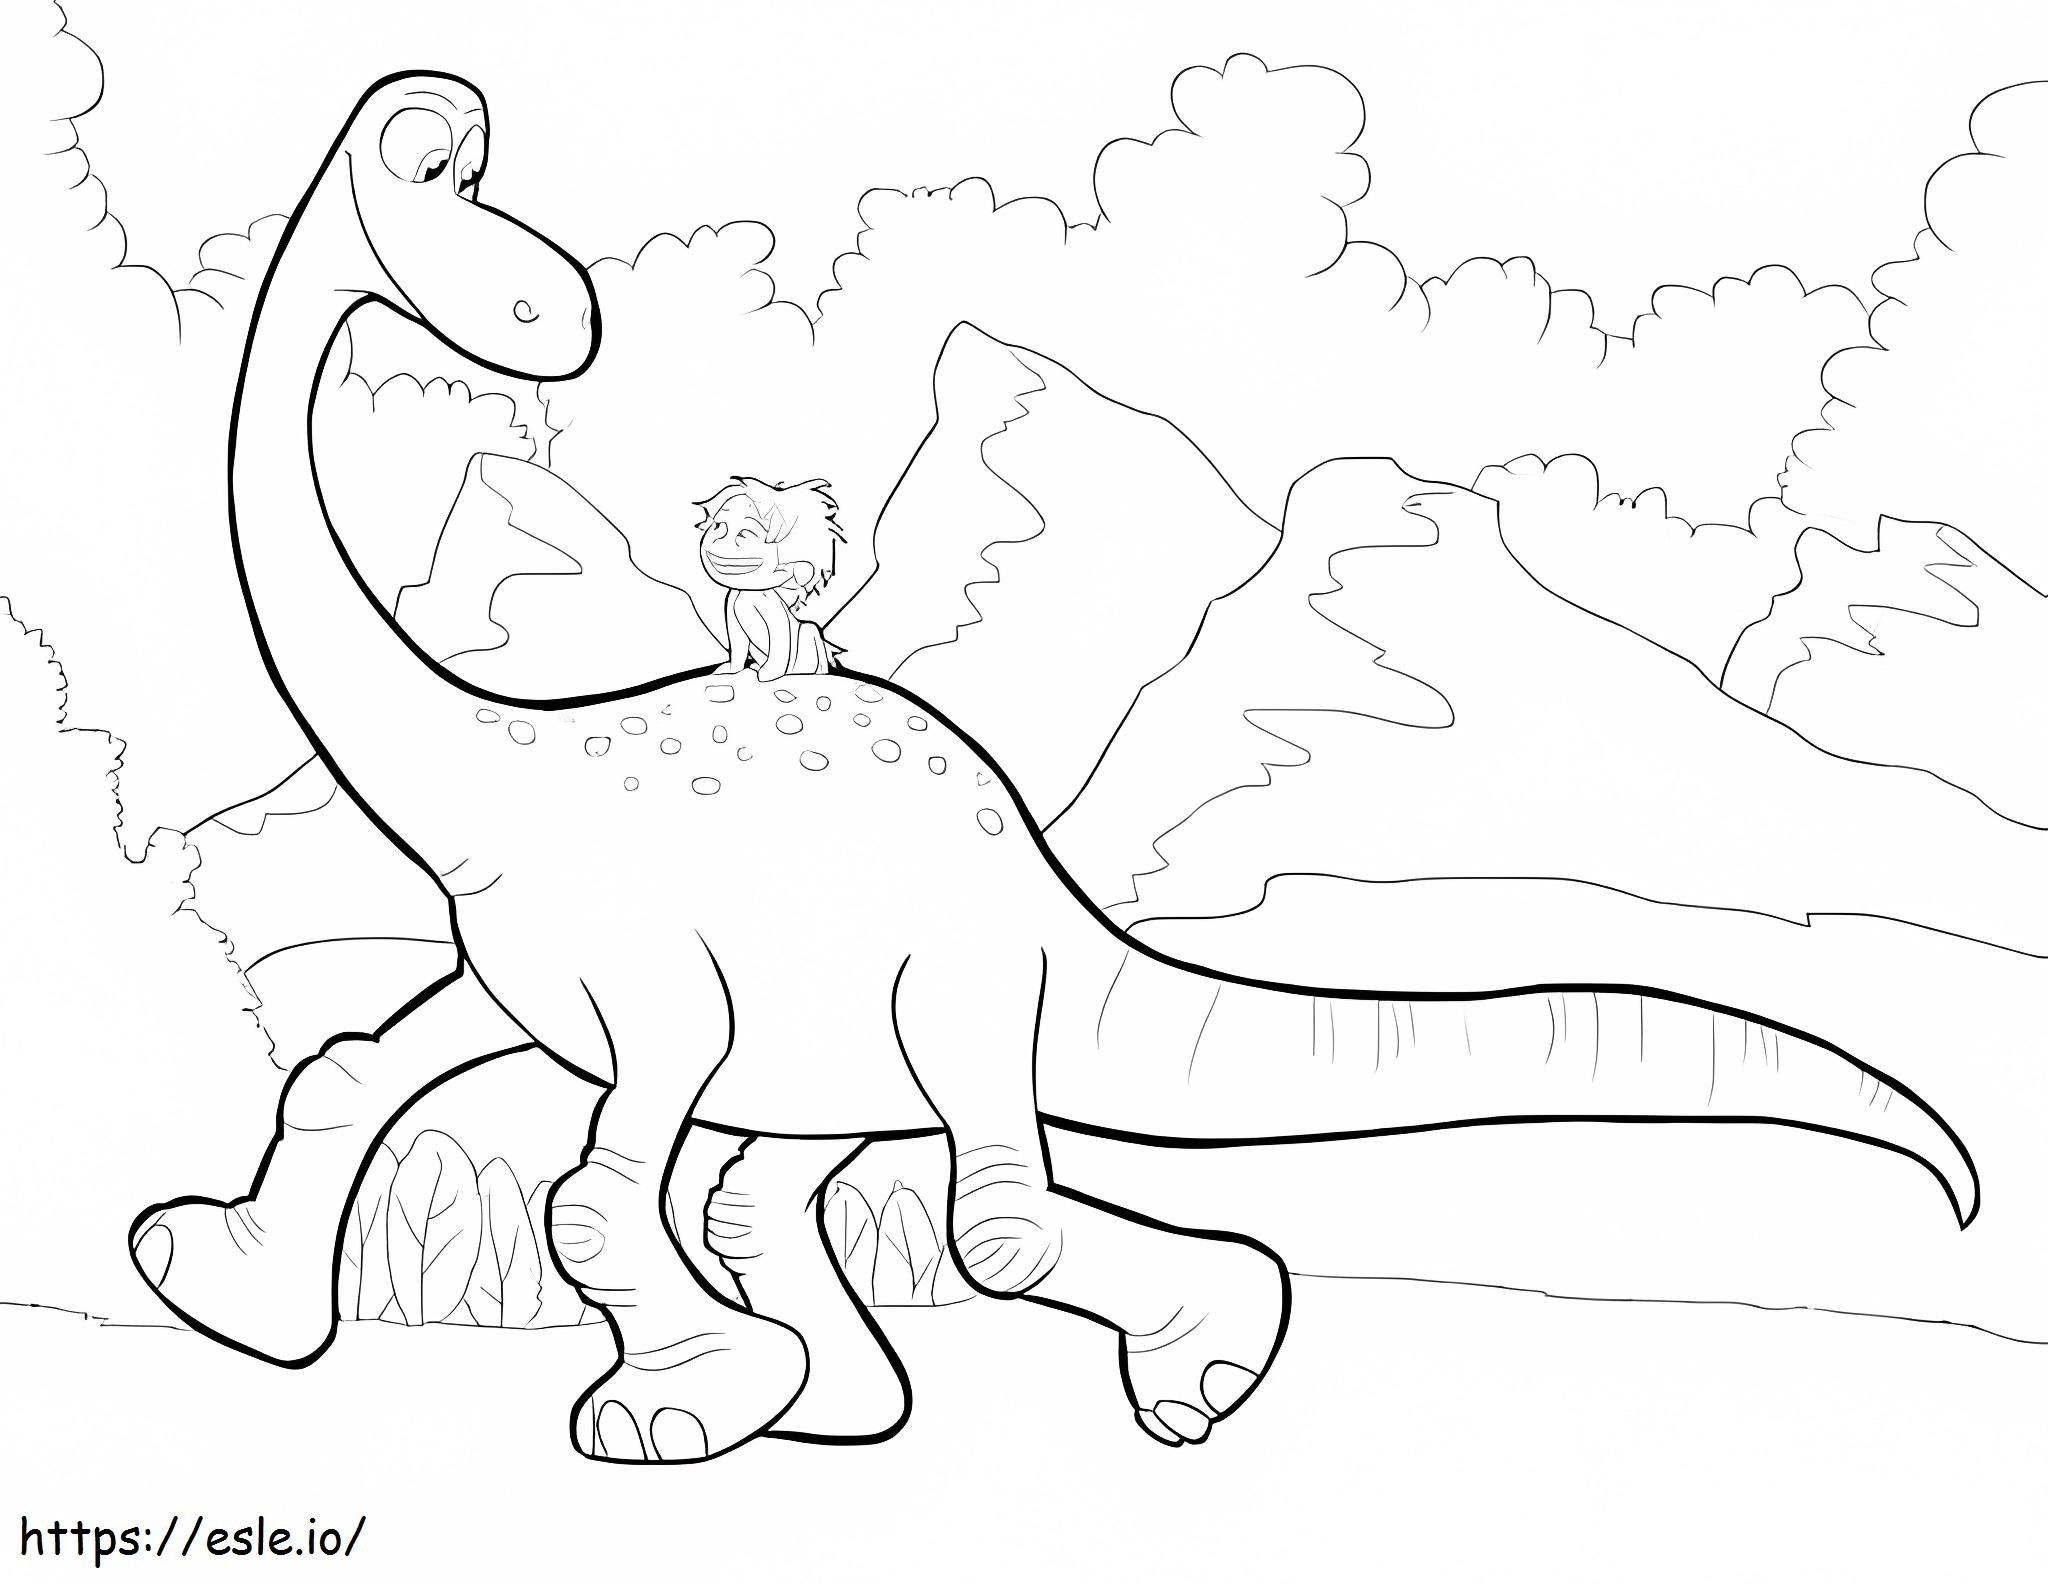 Spot On Arlo Walking coloring page